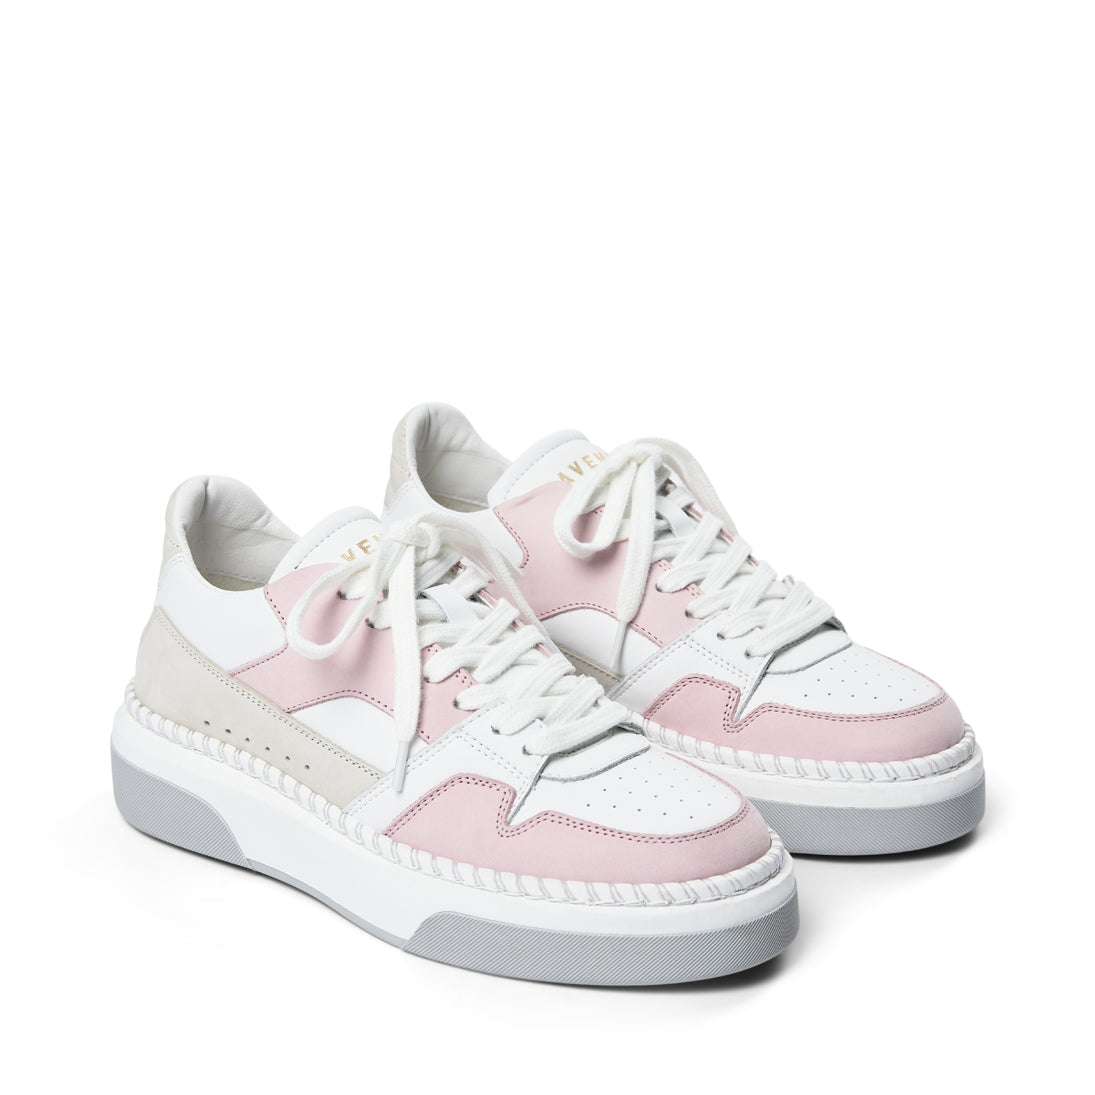 Pavement Boo Sneakers White/Rose 468